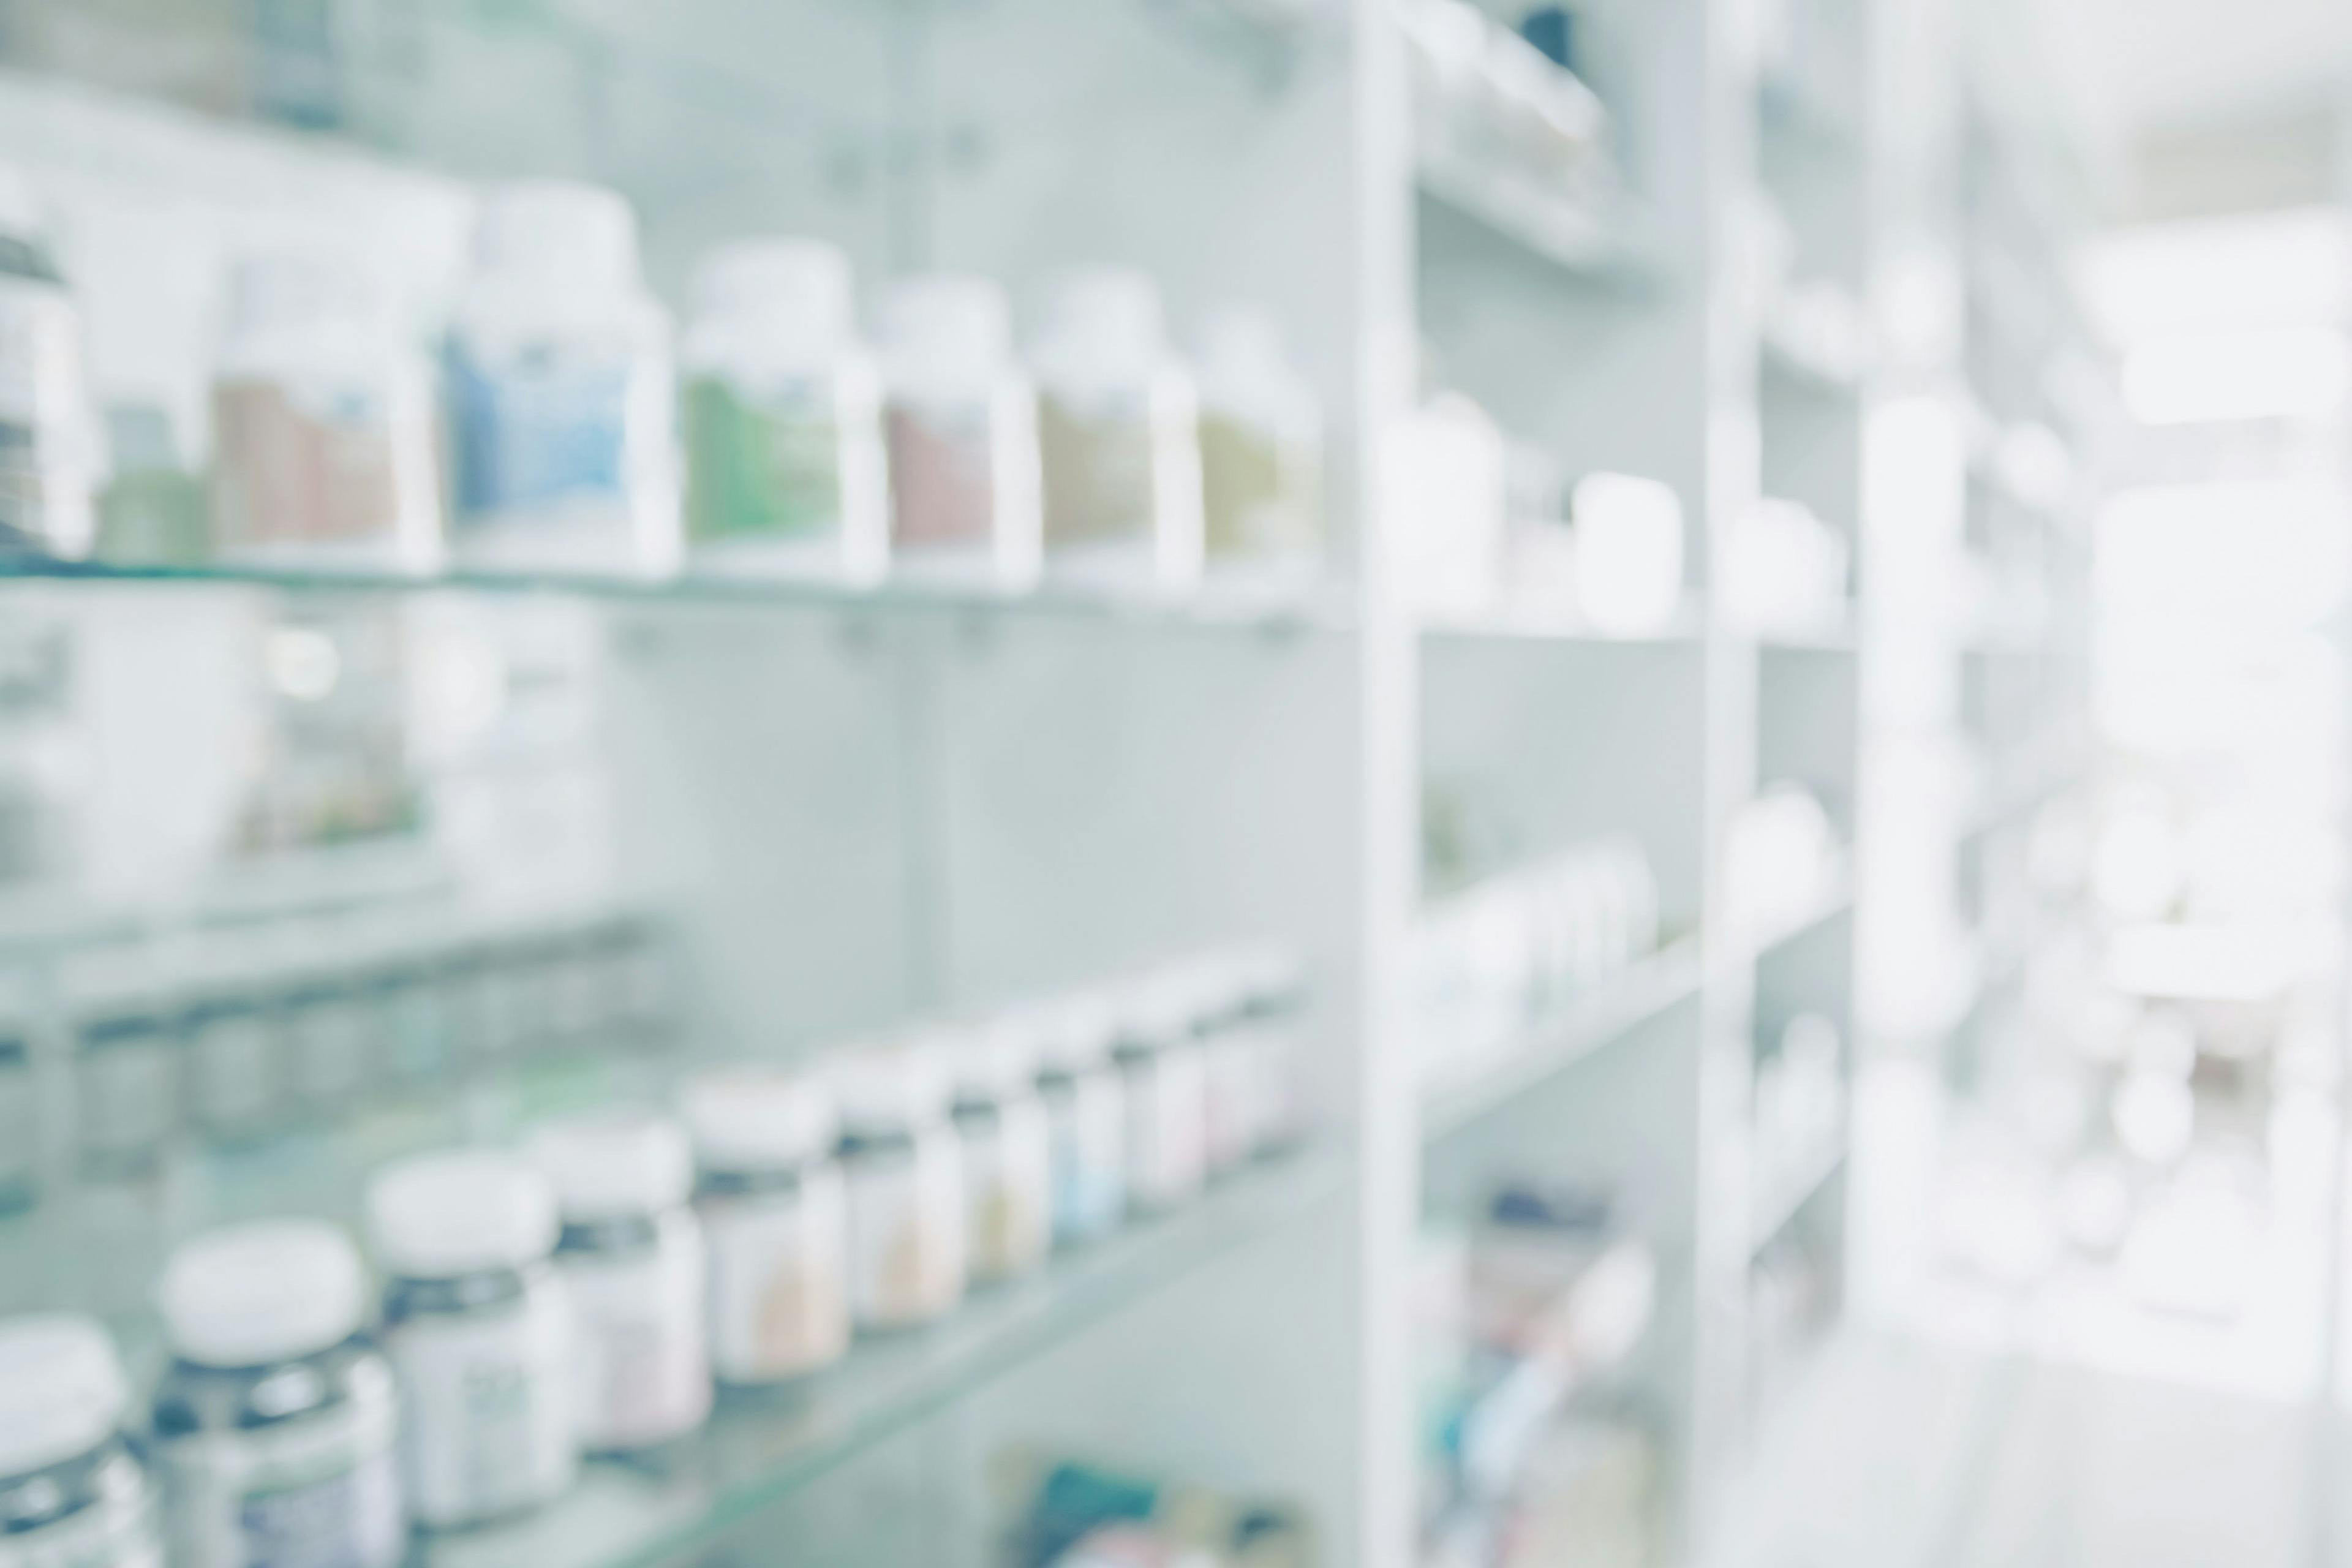 Pharmacy blurred light tone with store drugs shelves interior background | Image Credit: bixpicture - stock.adobe.com